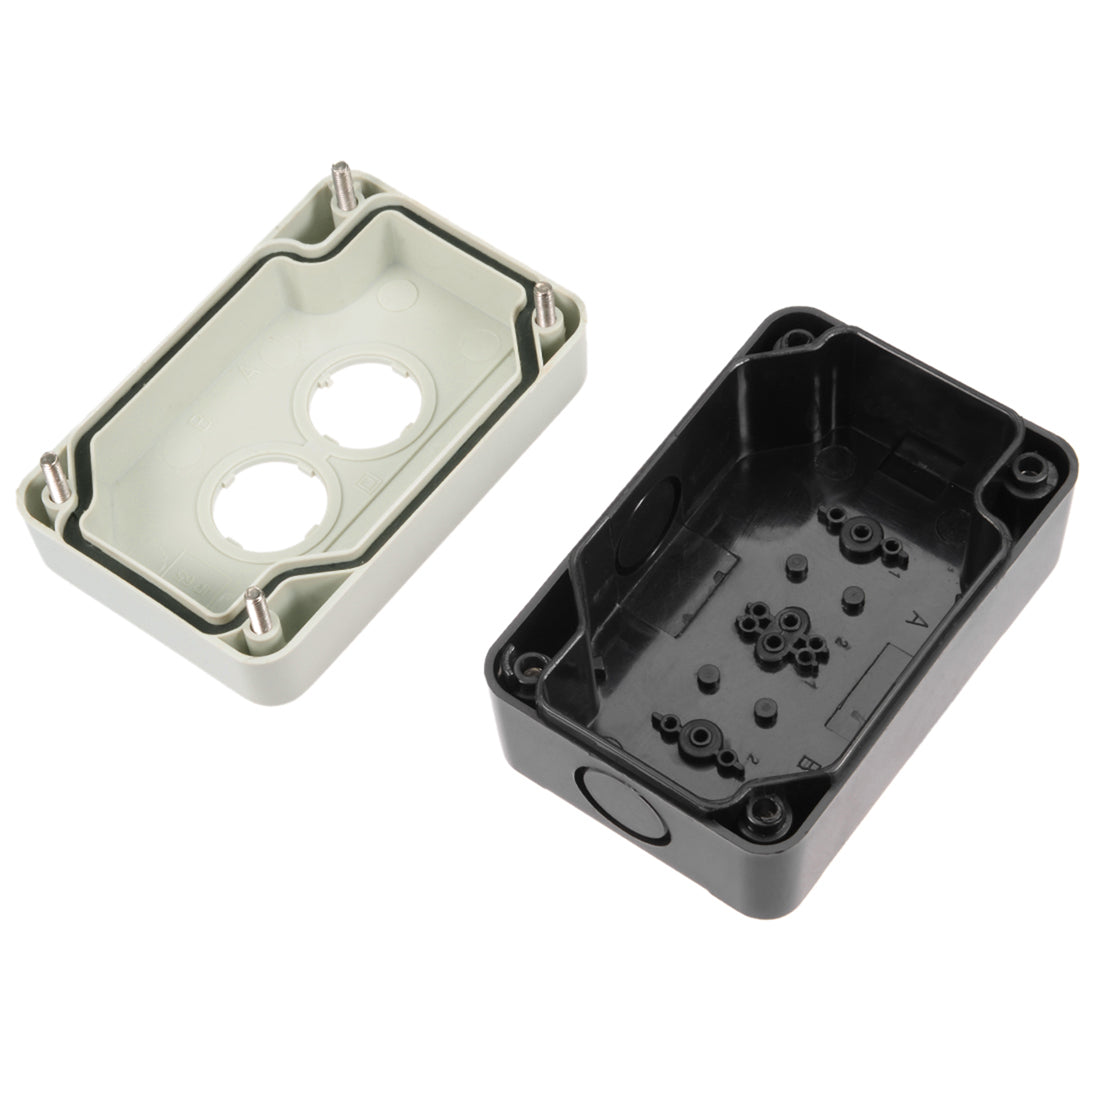 uxcell Uxcell Push Button Switch Control Station Box 22mm 2 Button Hole Watertight Black and White Grey